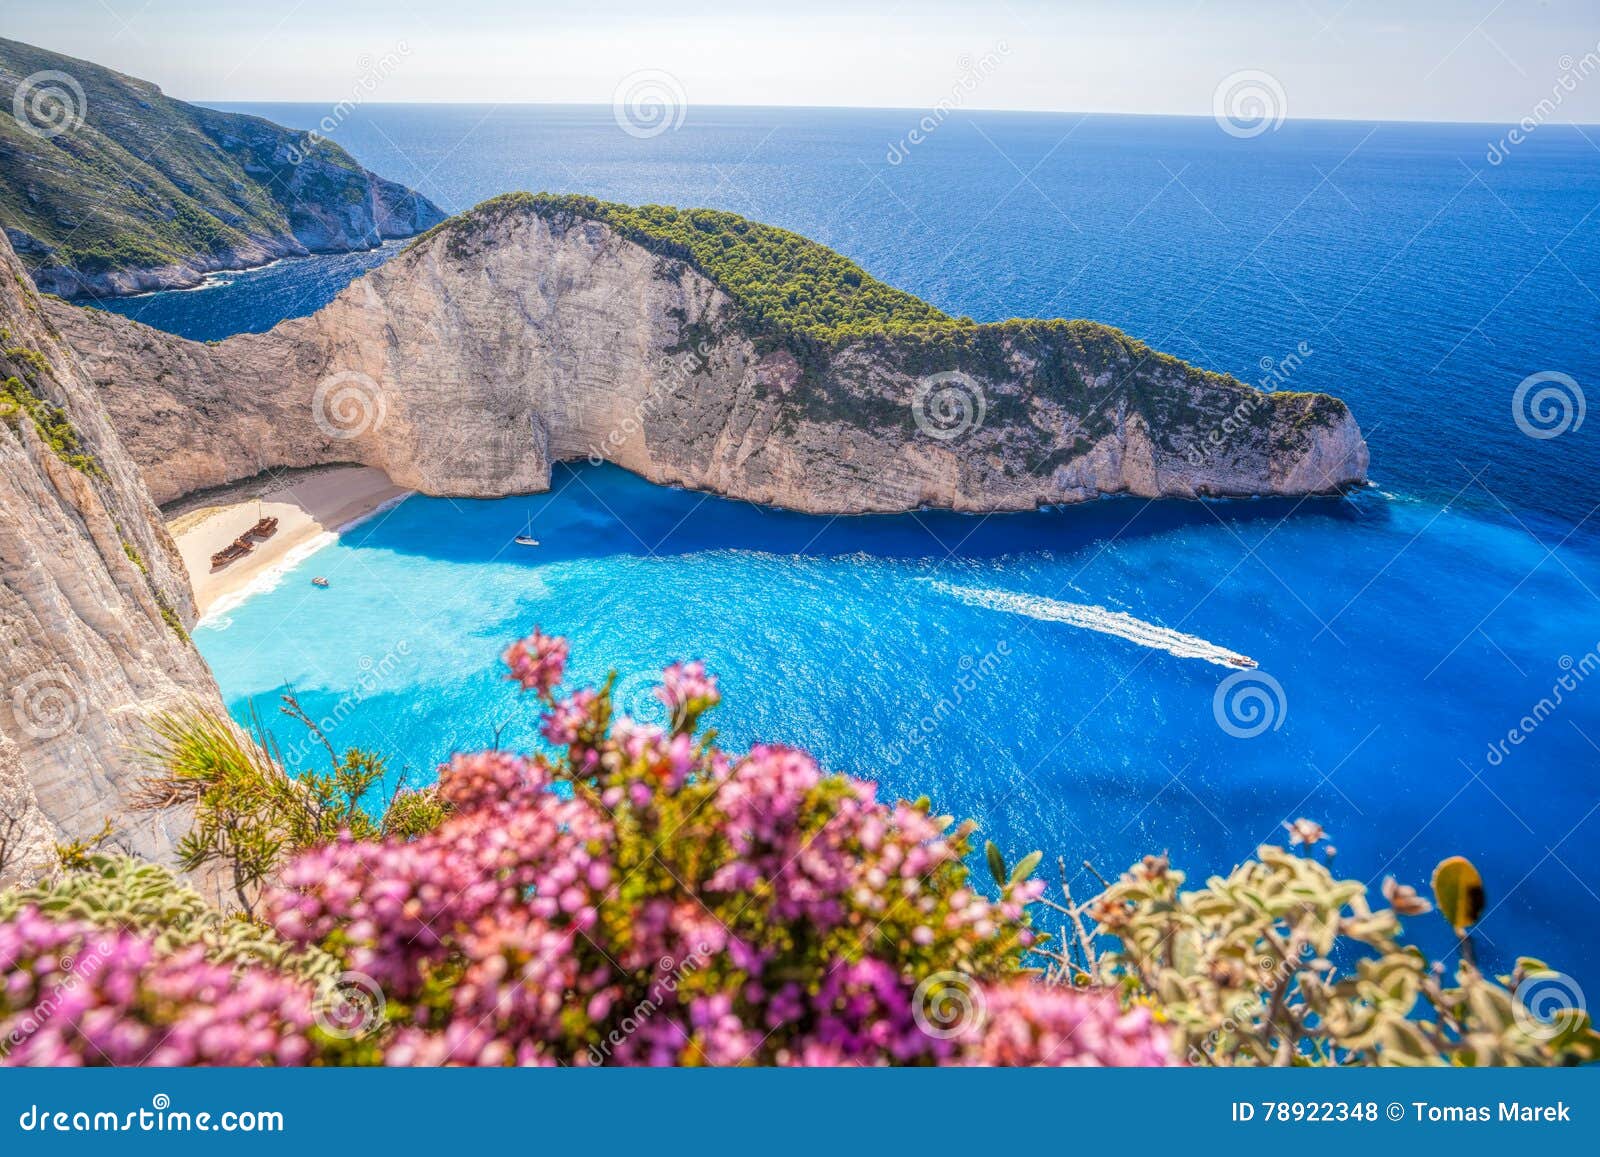 navagio beach with shipwreck and flowers on zakynthos island in greece